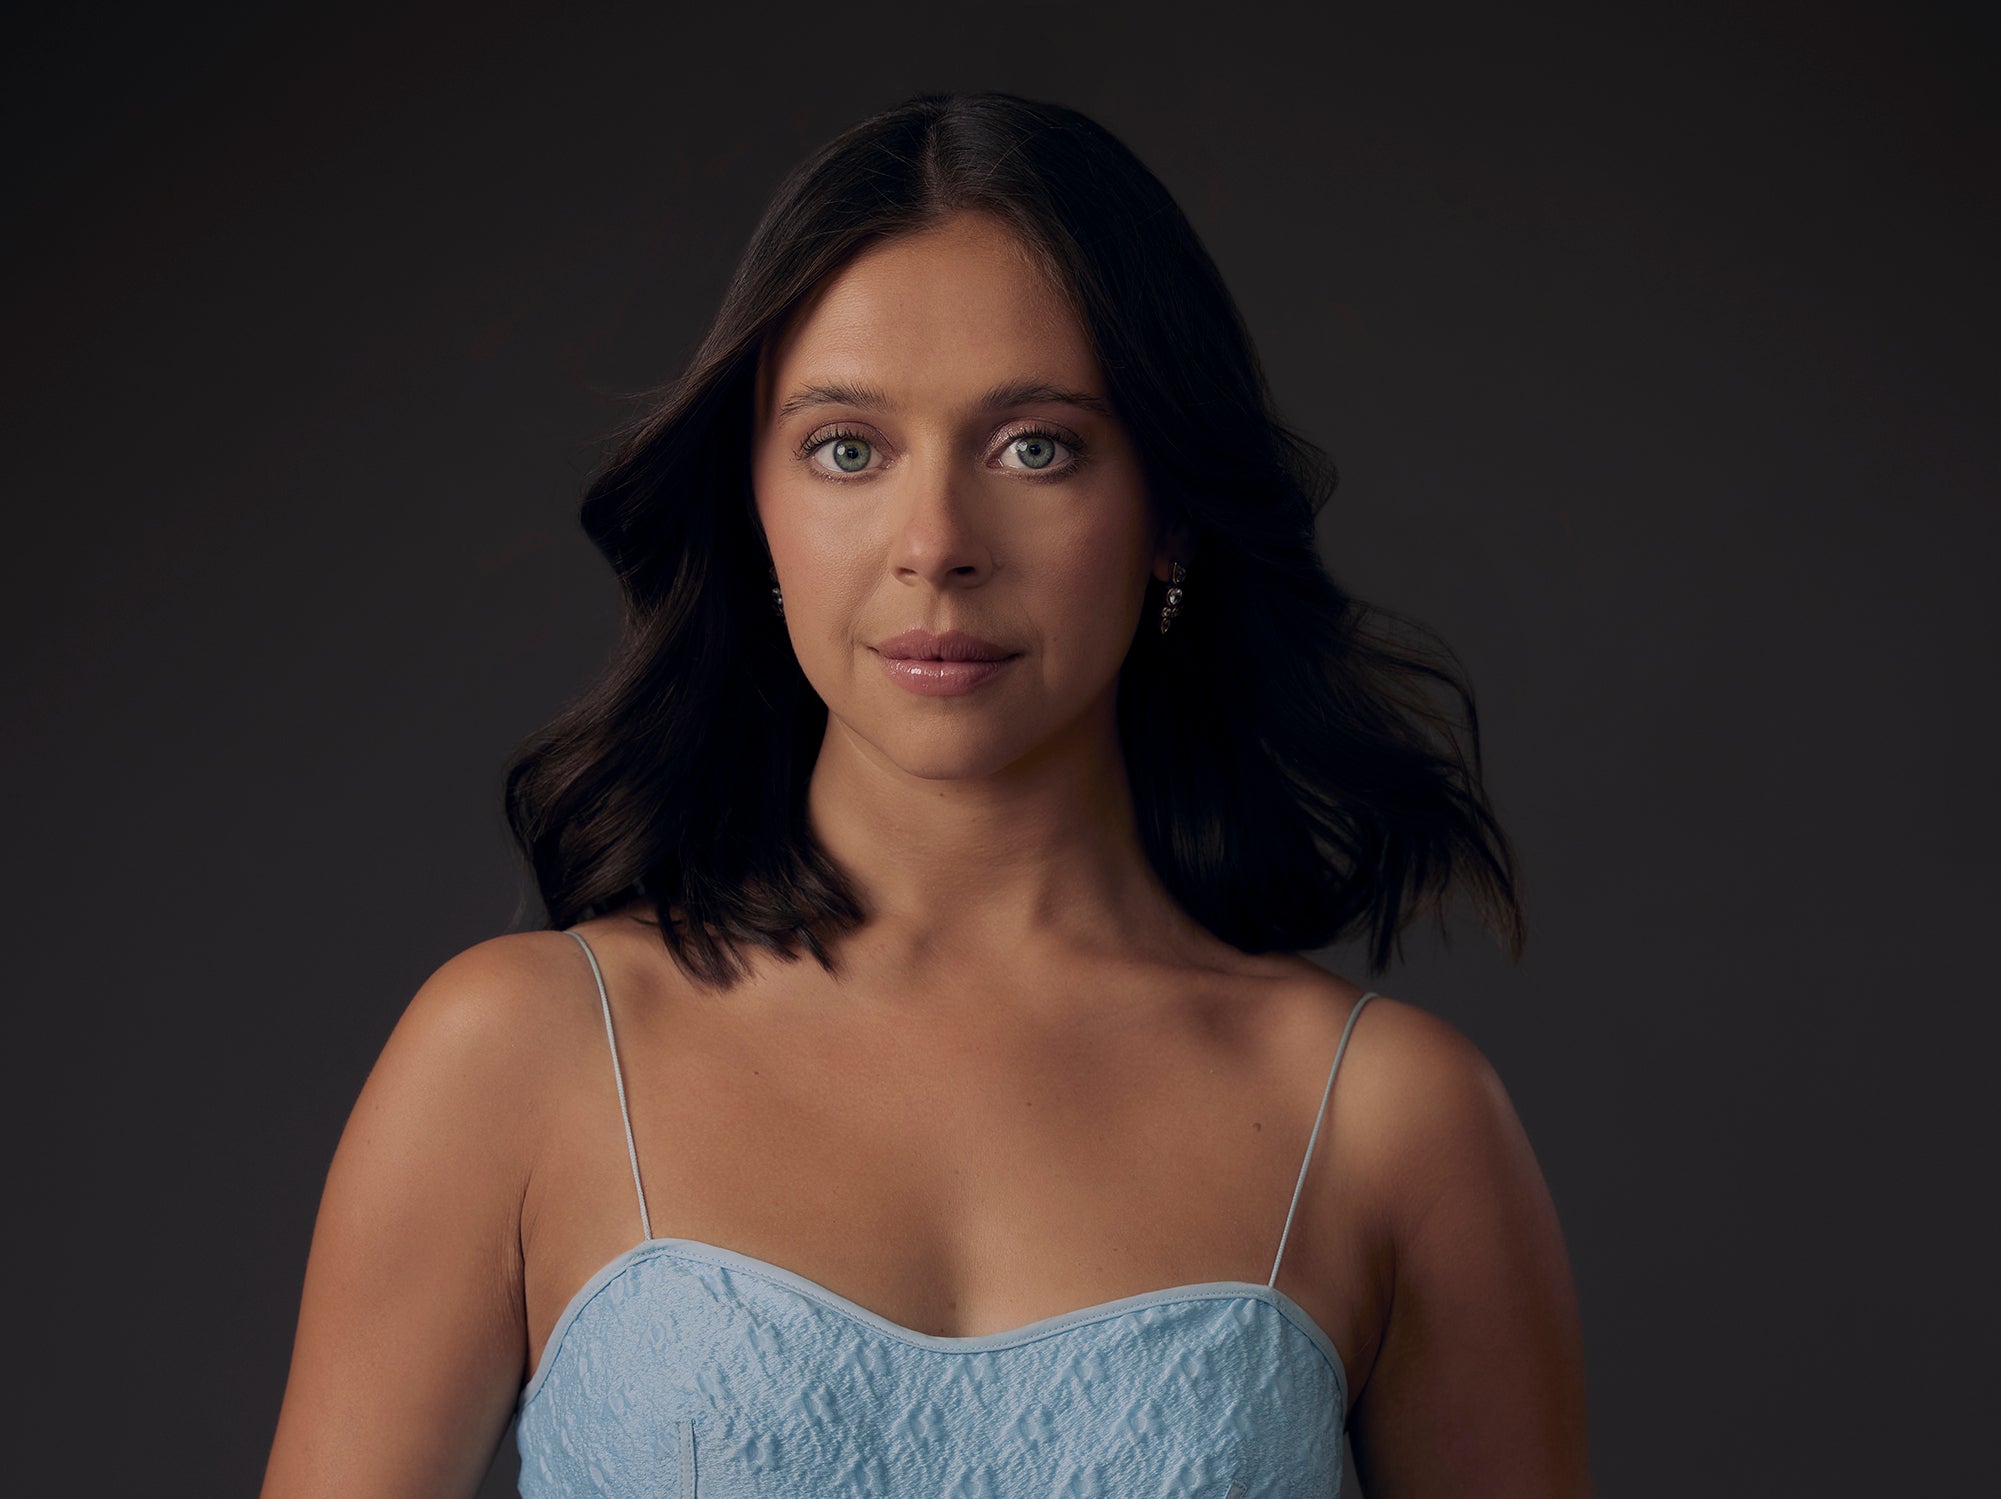 Bel Powley on Botox, nepotism and difficult sex scenes The heroin chic thing is gonna die again, right? The Independent